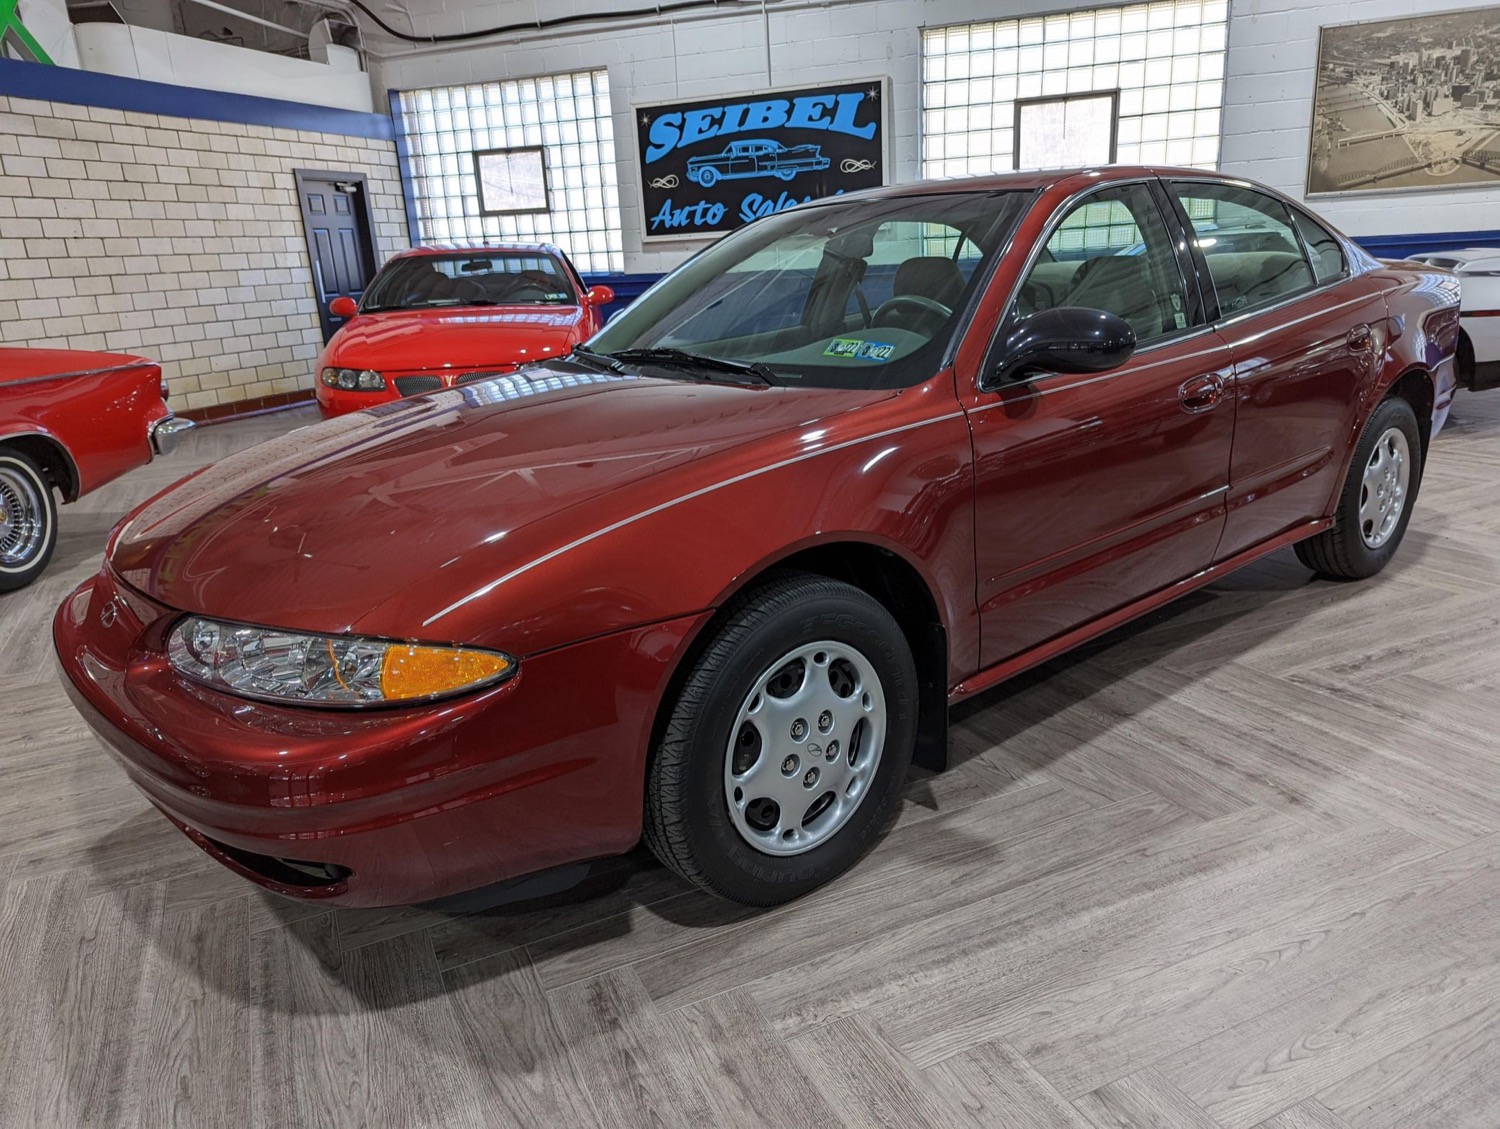 Almost-New 2003 Oldsmobile Alero Up For Auction